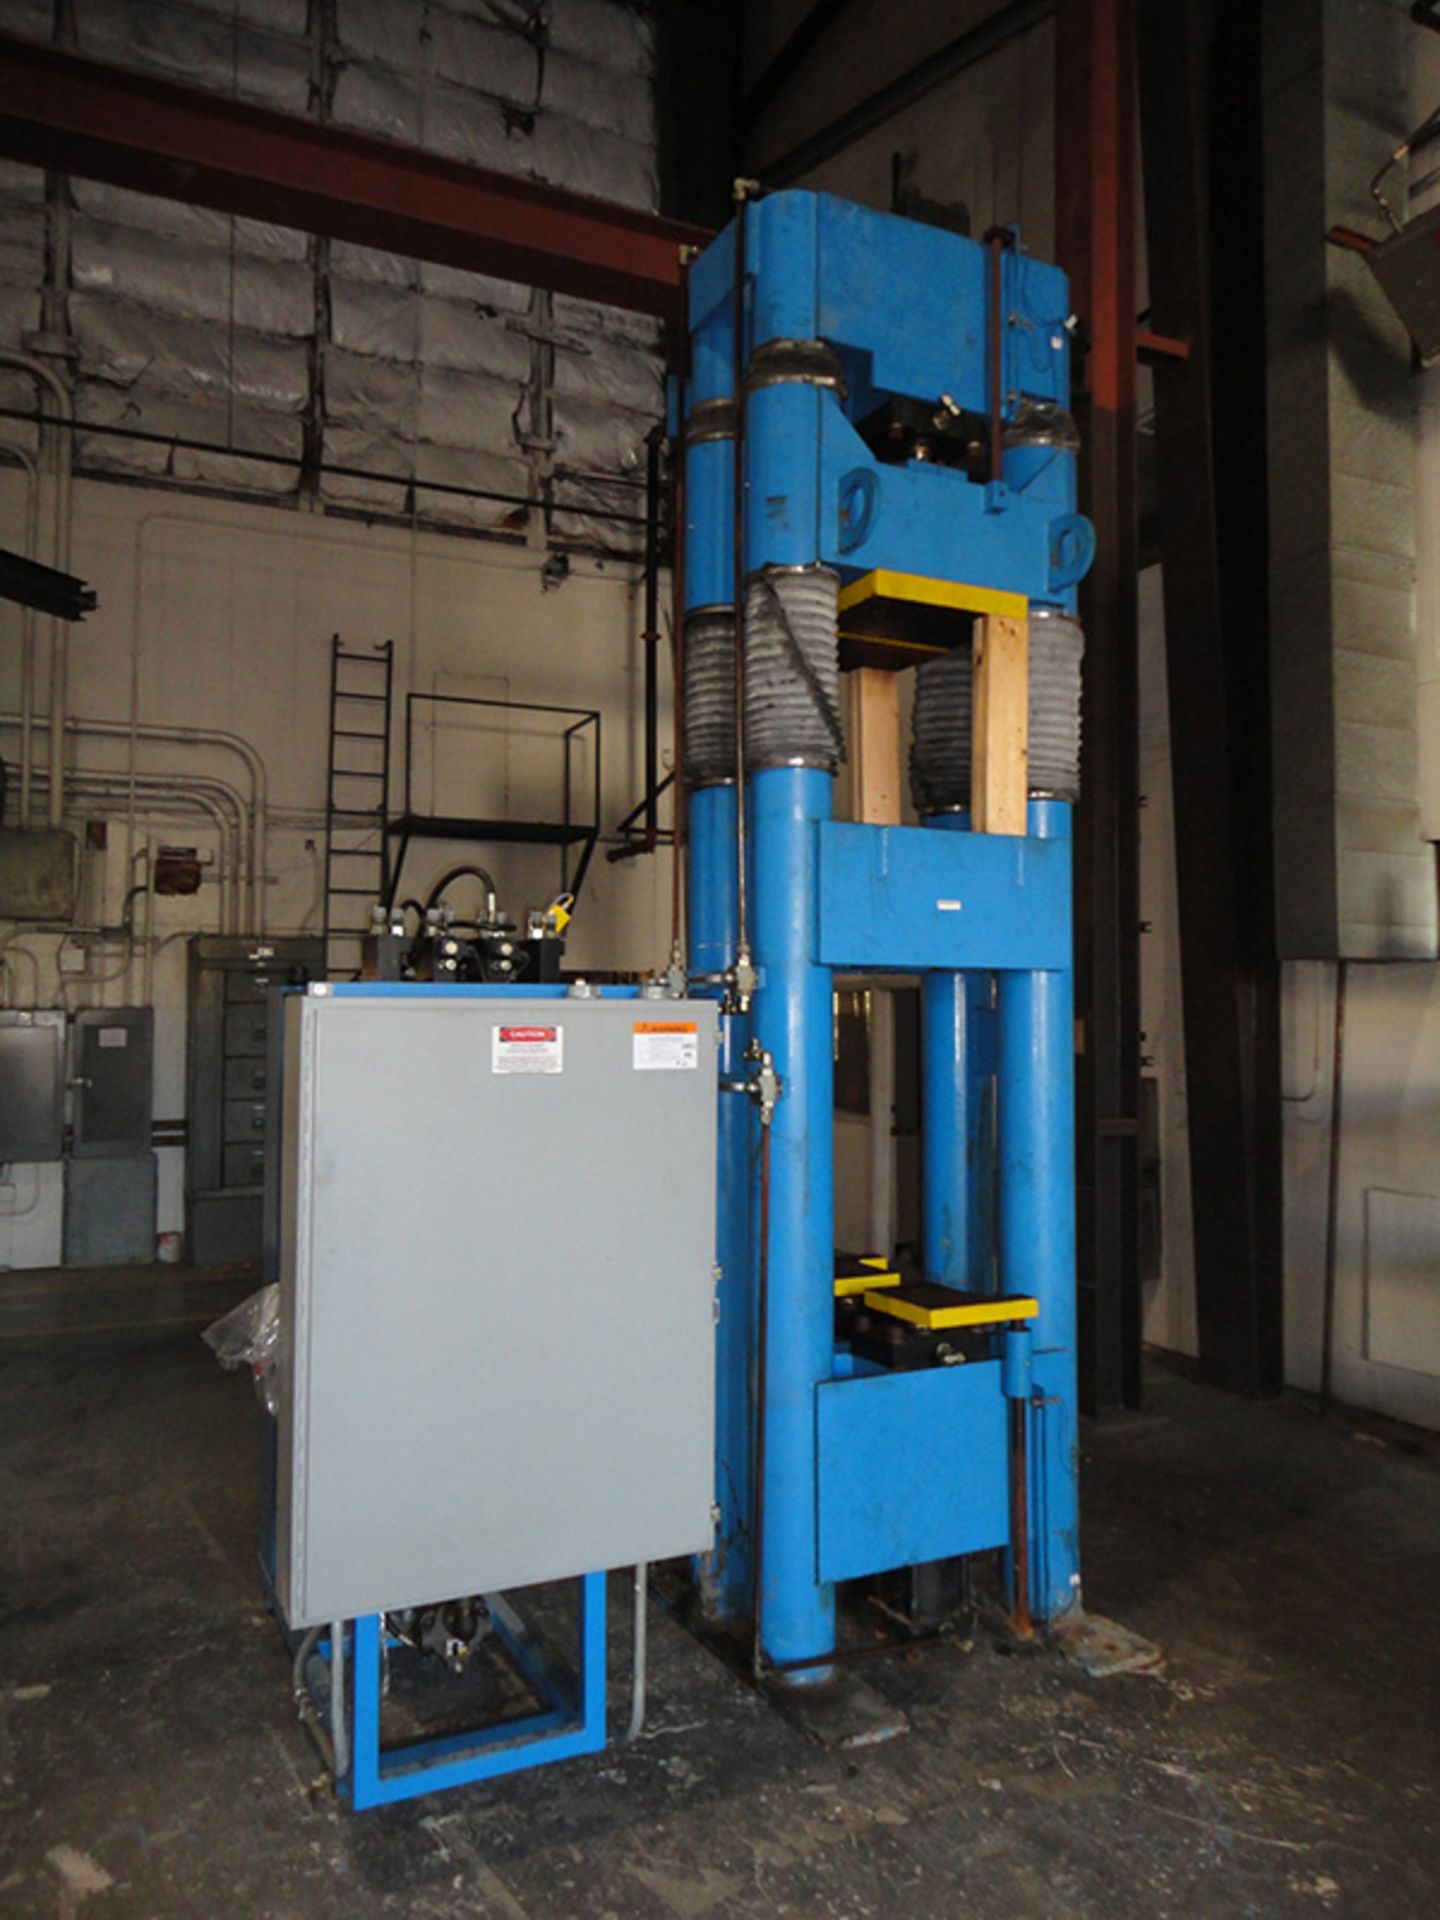 2002 Beckwood Four Post Hydraulic Powder Compaction Press (Up & Down Acting) | 110-Ton x 12" x 12" x - Image 3 of 3